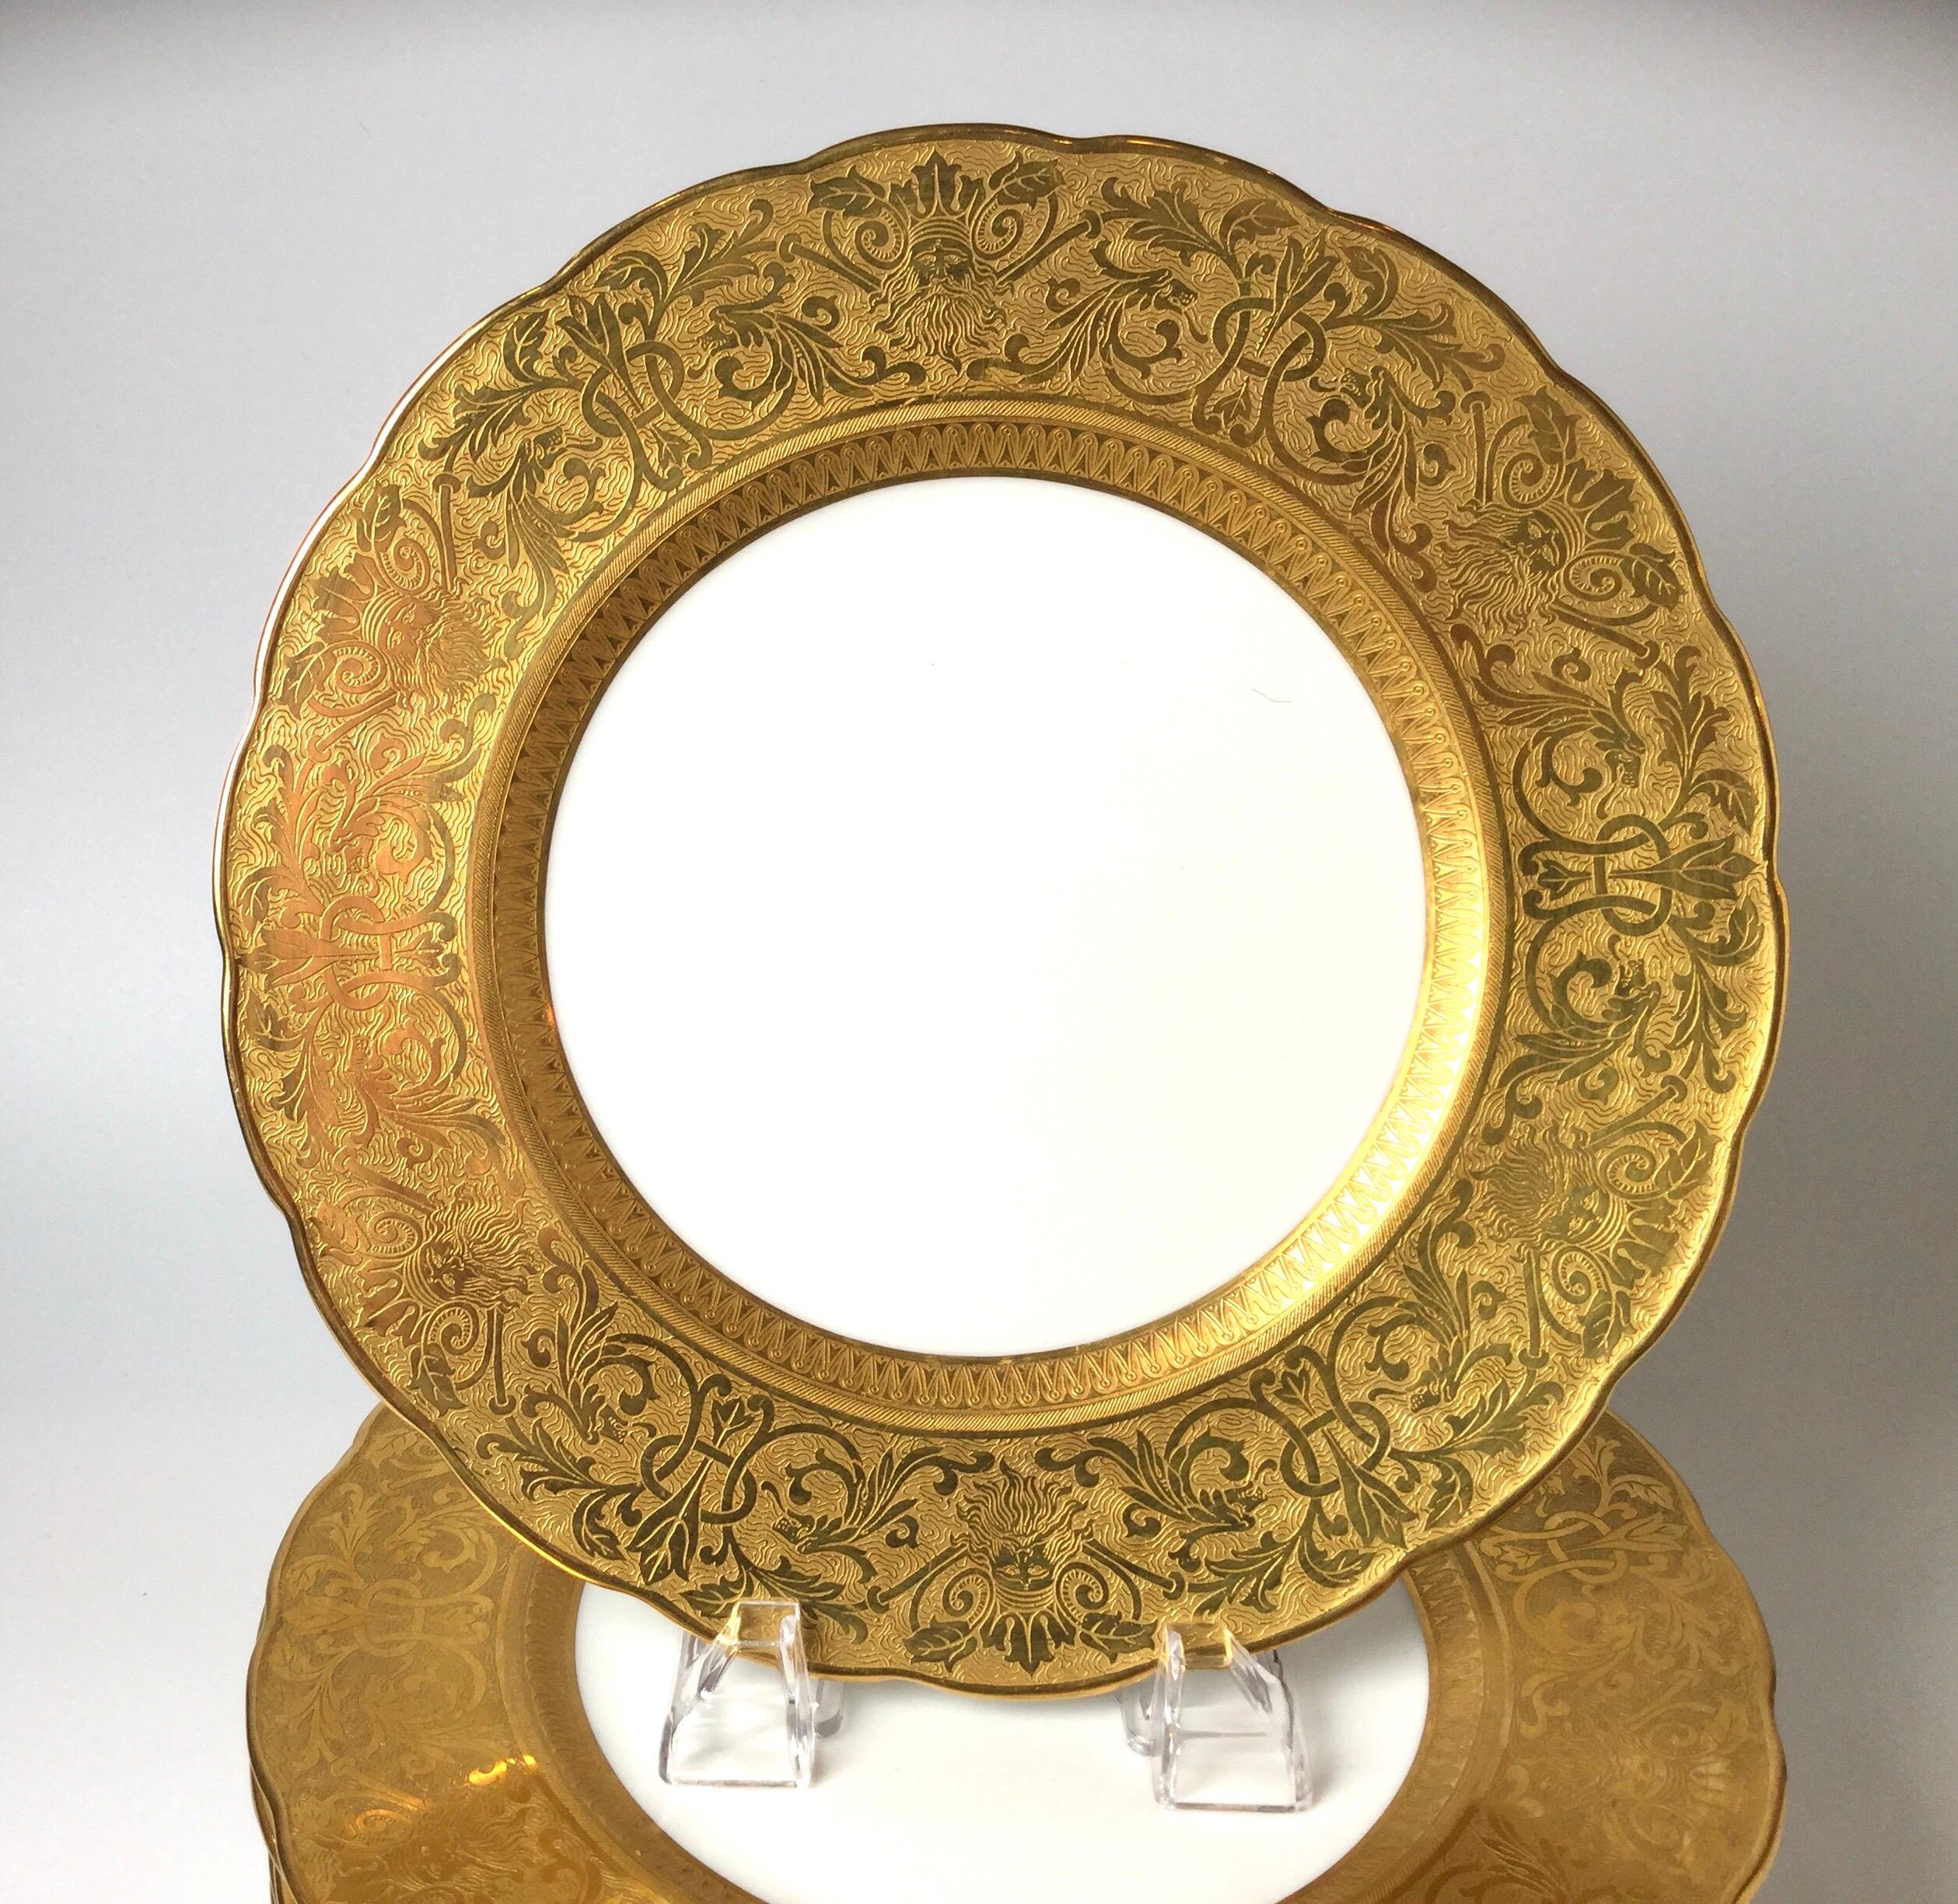 Set of ten outstanding gold embossed figurative head service plates. Thick luxurious gold band border with white porcelain background.